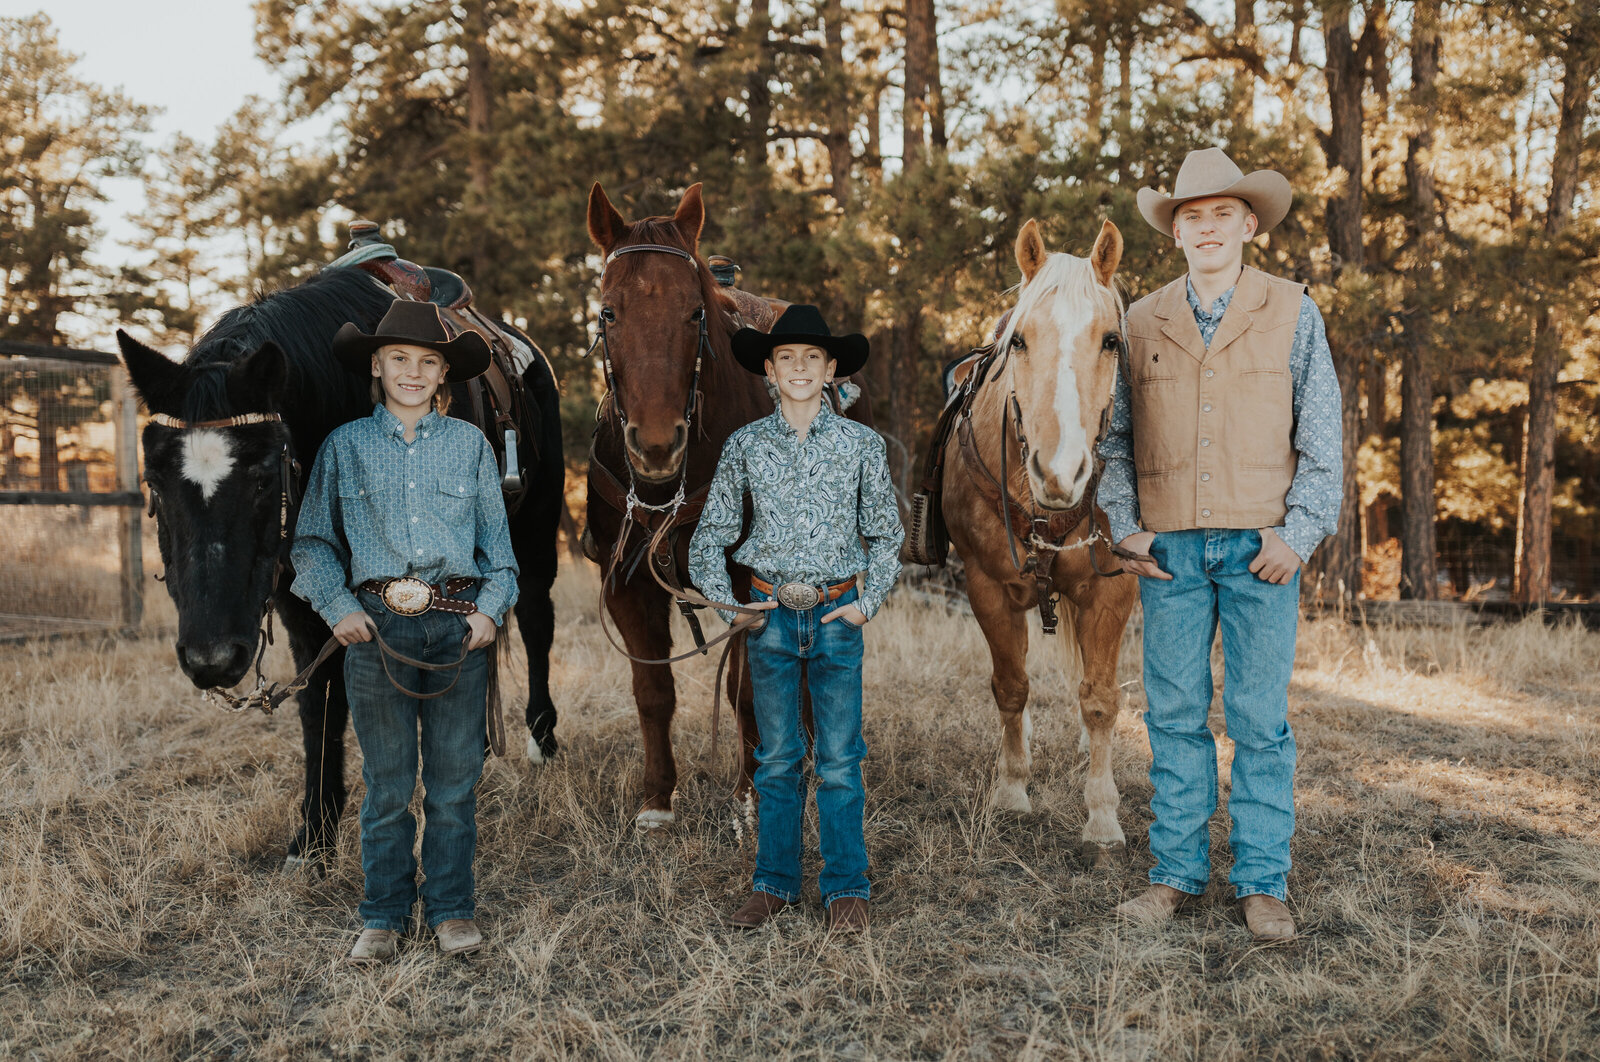 Brothers posing with their horses